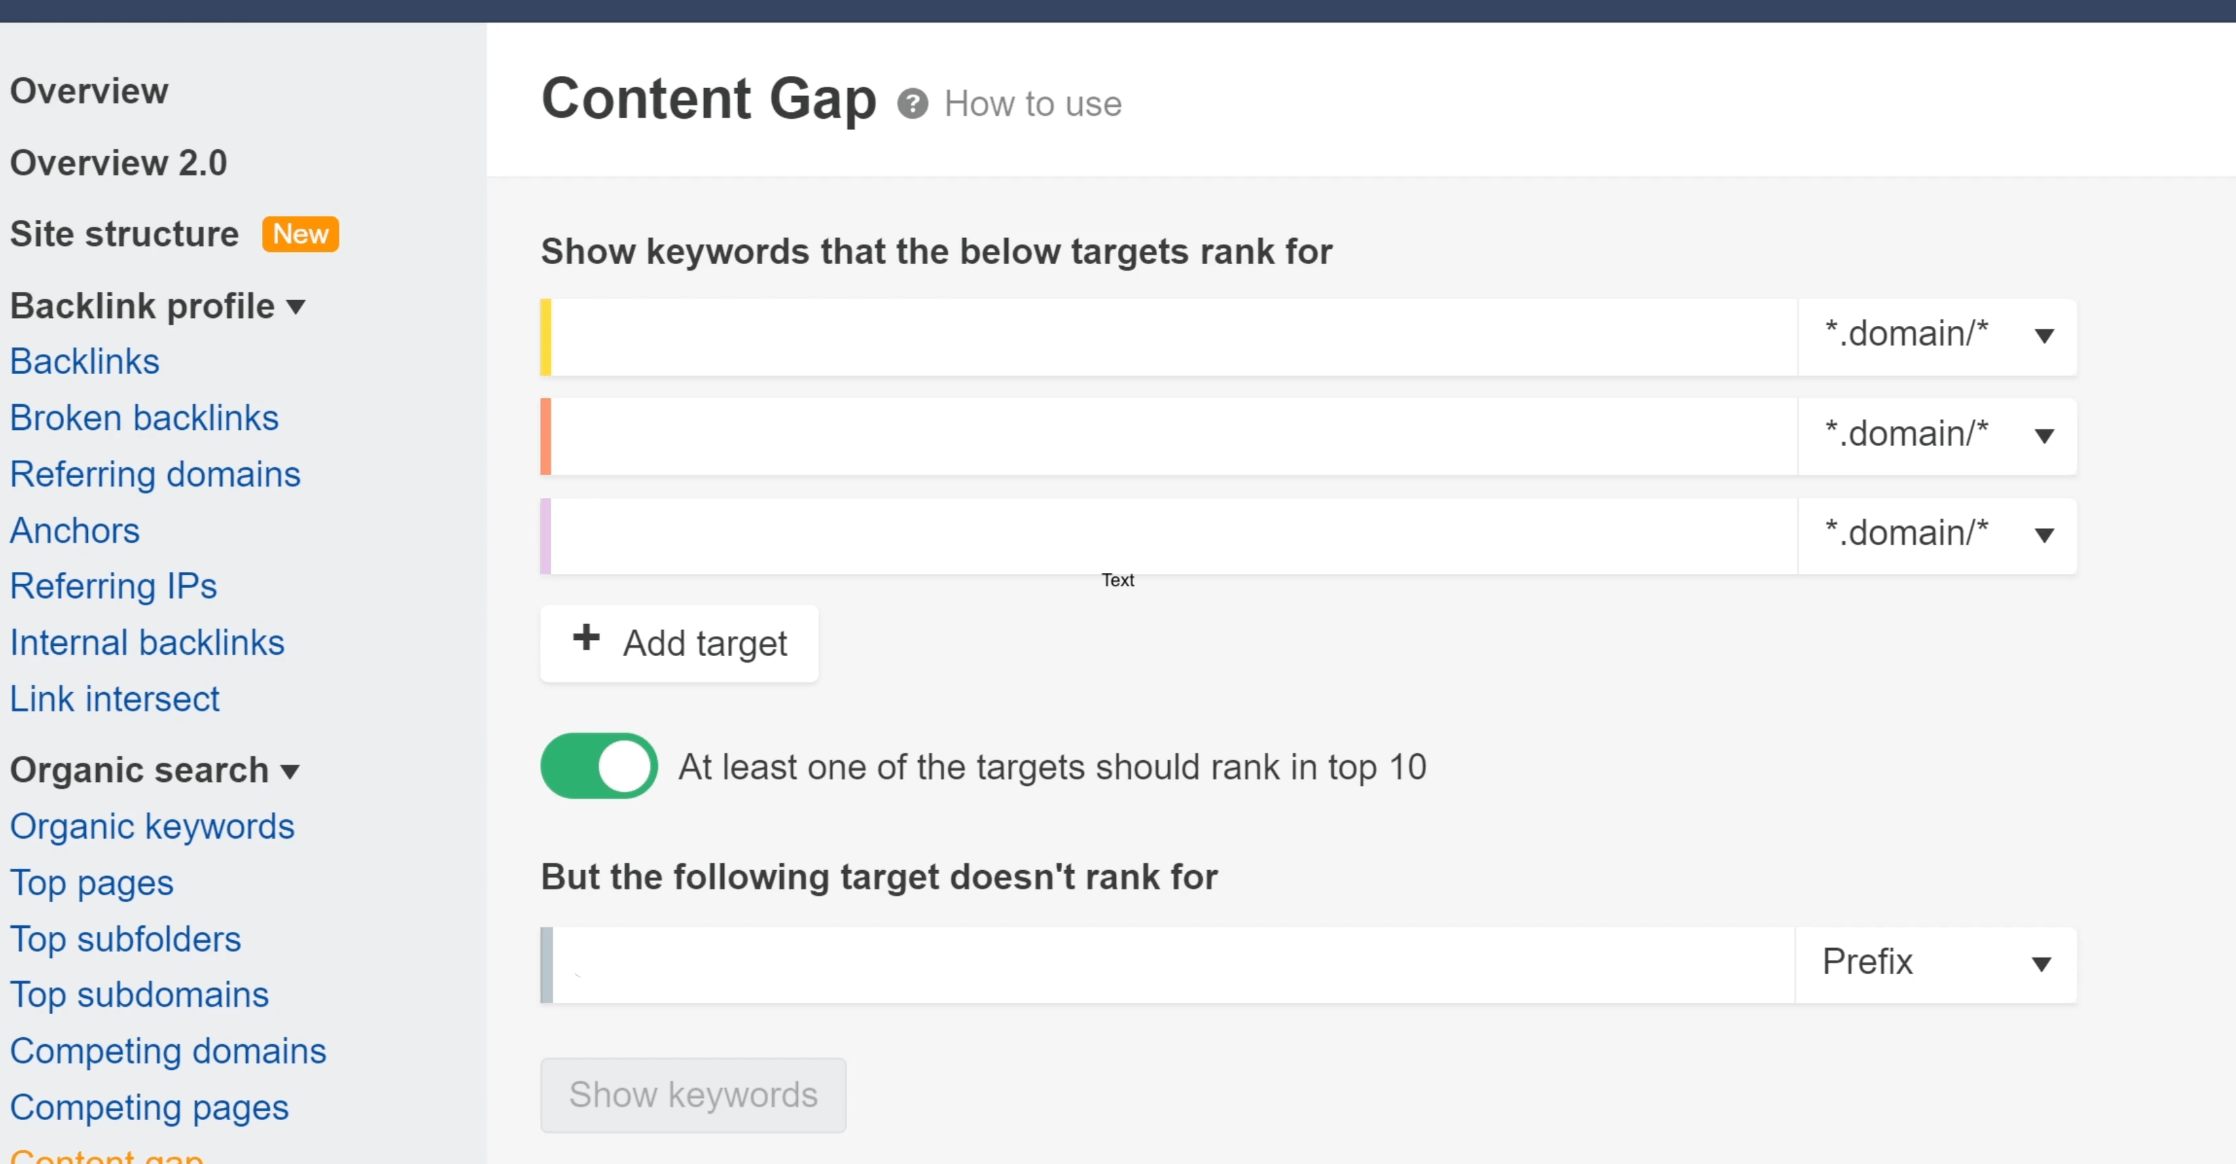 Ahrefs’ Content Gap analysis feature